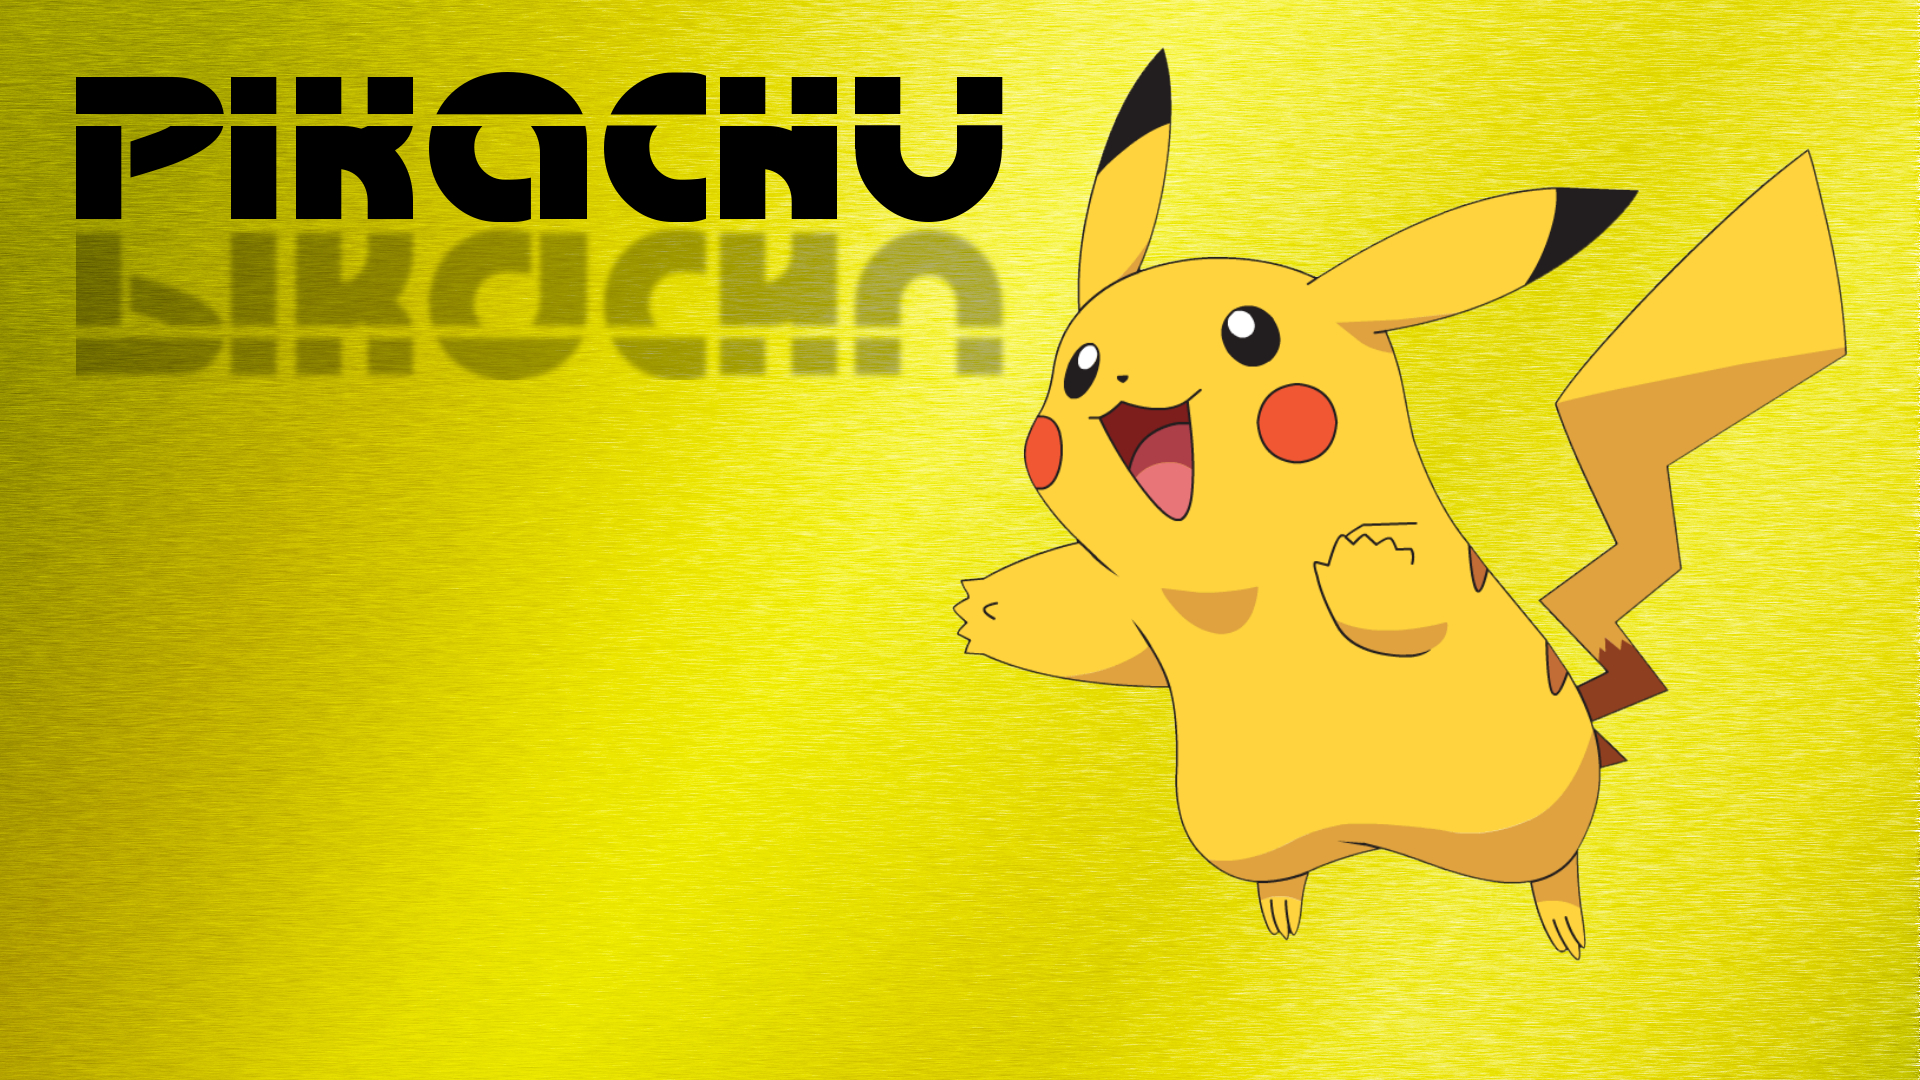 Full HD Pikachu Wallpaper Pictures